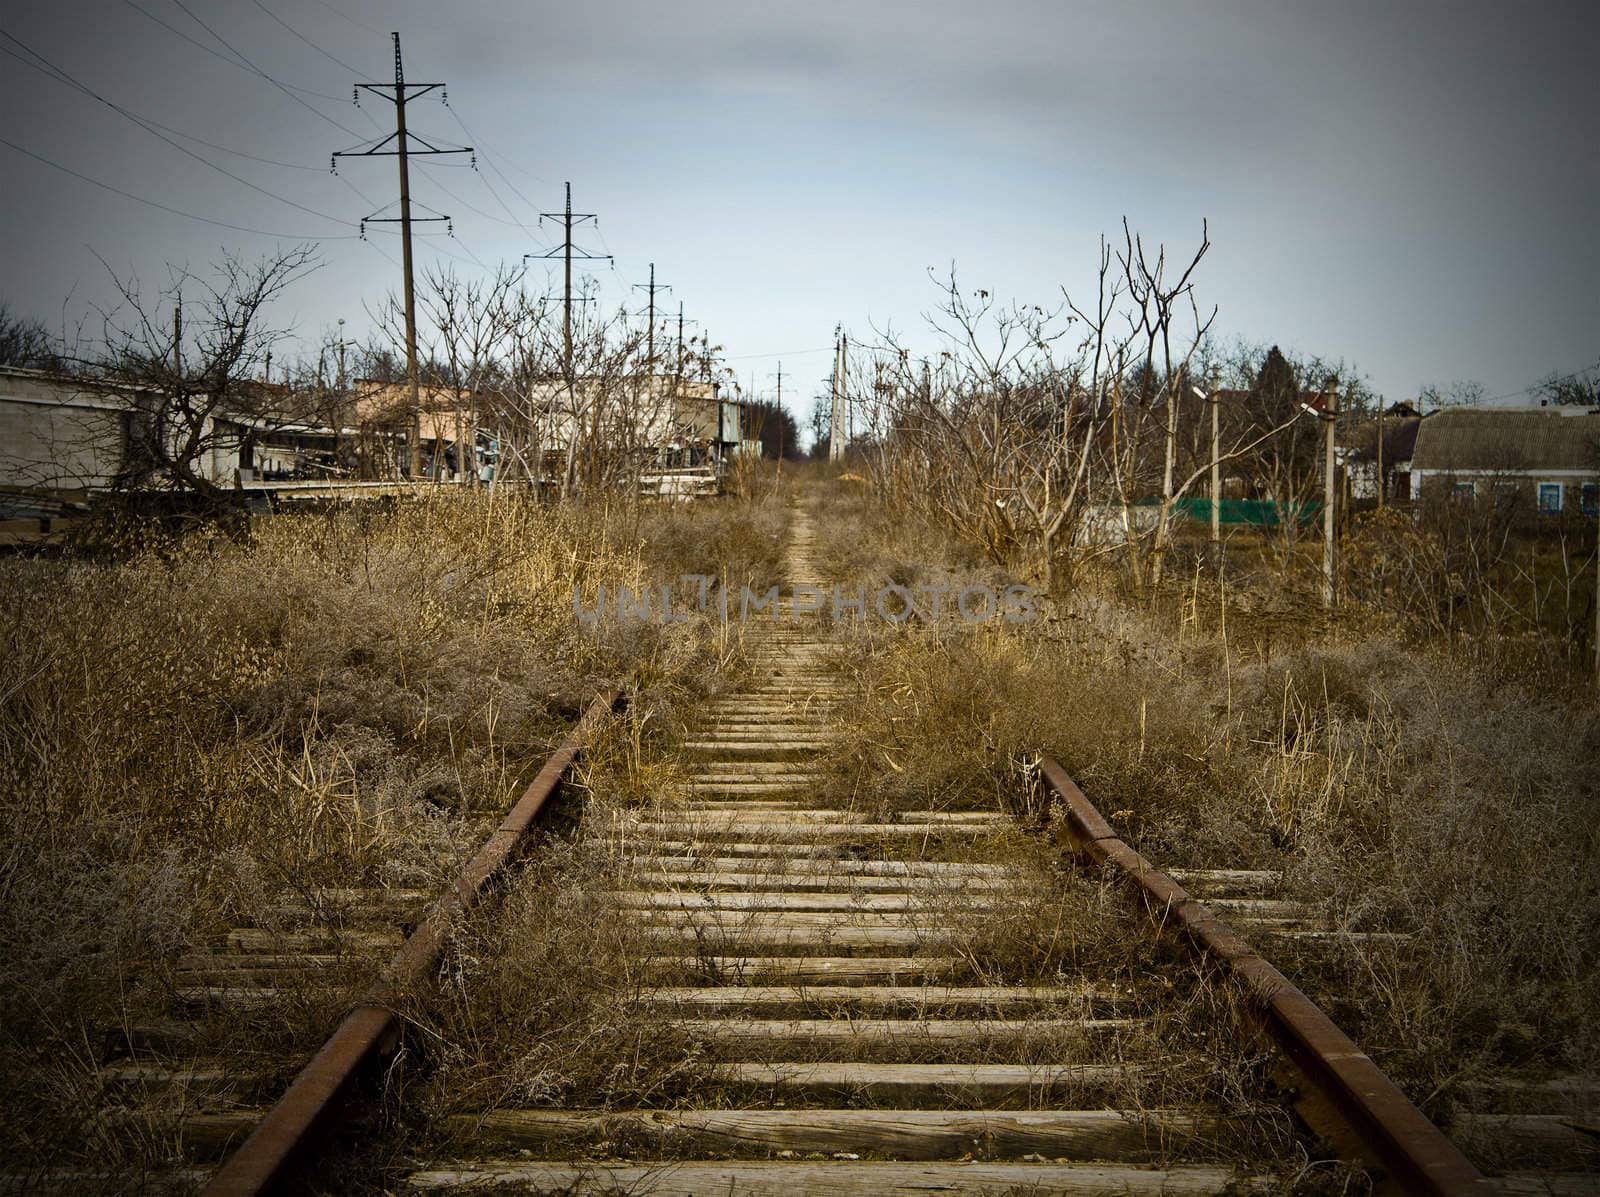 The thrown railway access ways as a result of manufacture crisis by NickNick